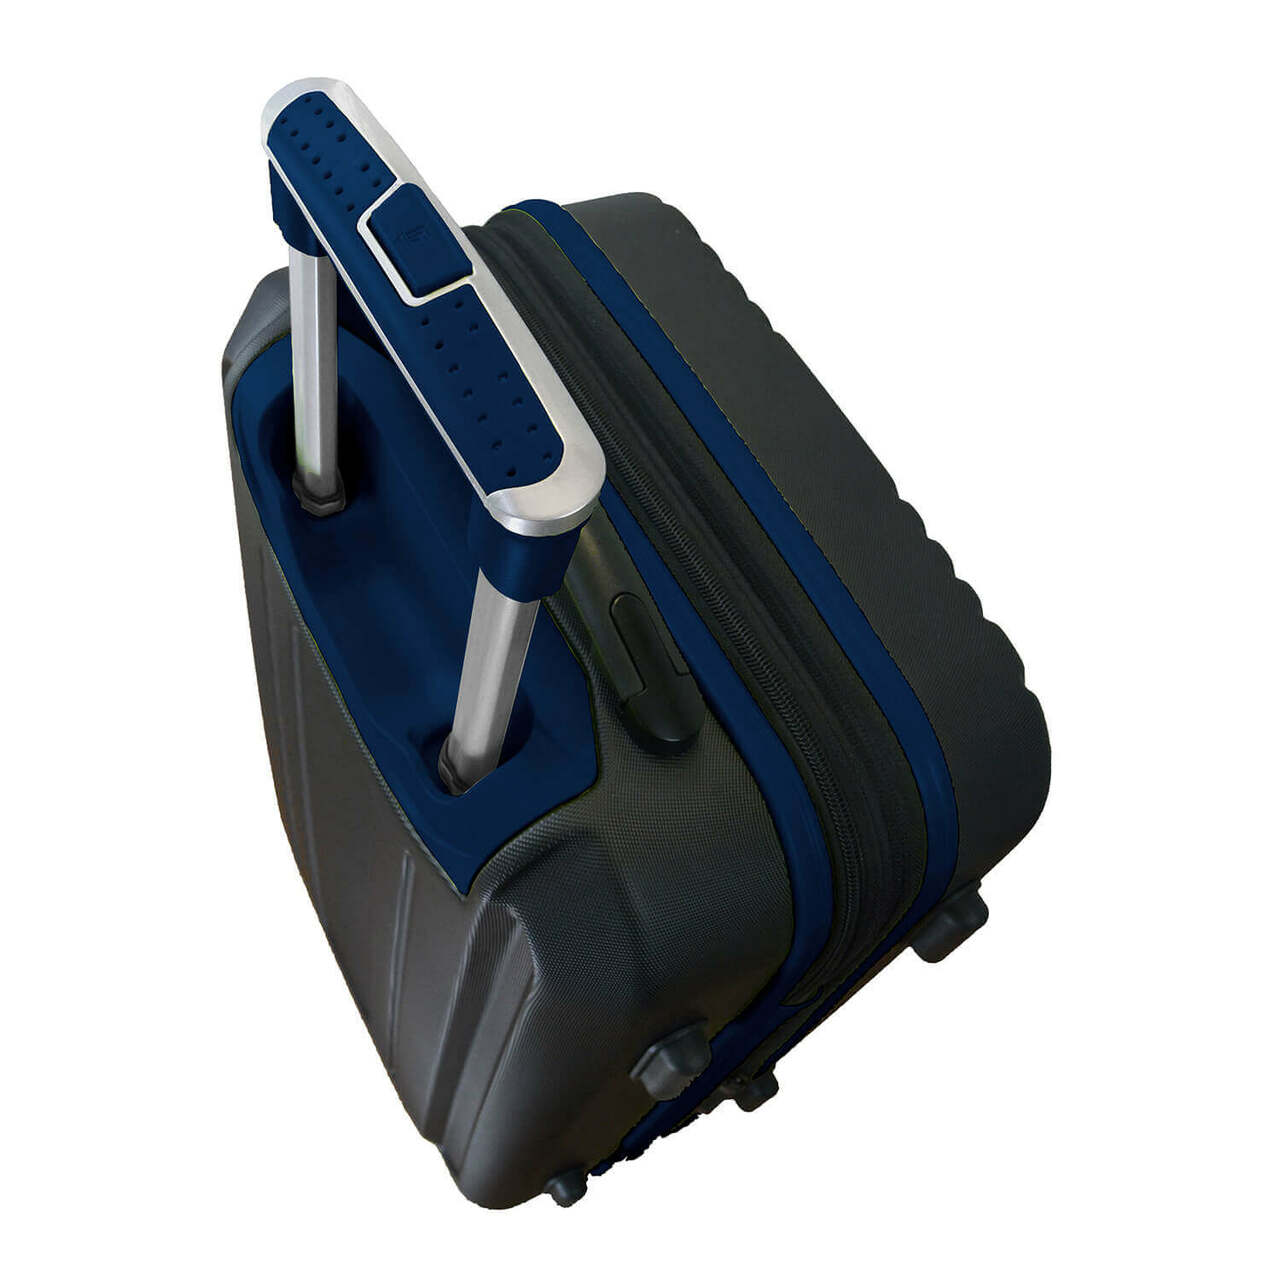 Uconn Carry On Spinner Luggage | Connecticut Hardcase Two-Tone Luggage Carry-on Spinner in Navy